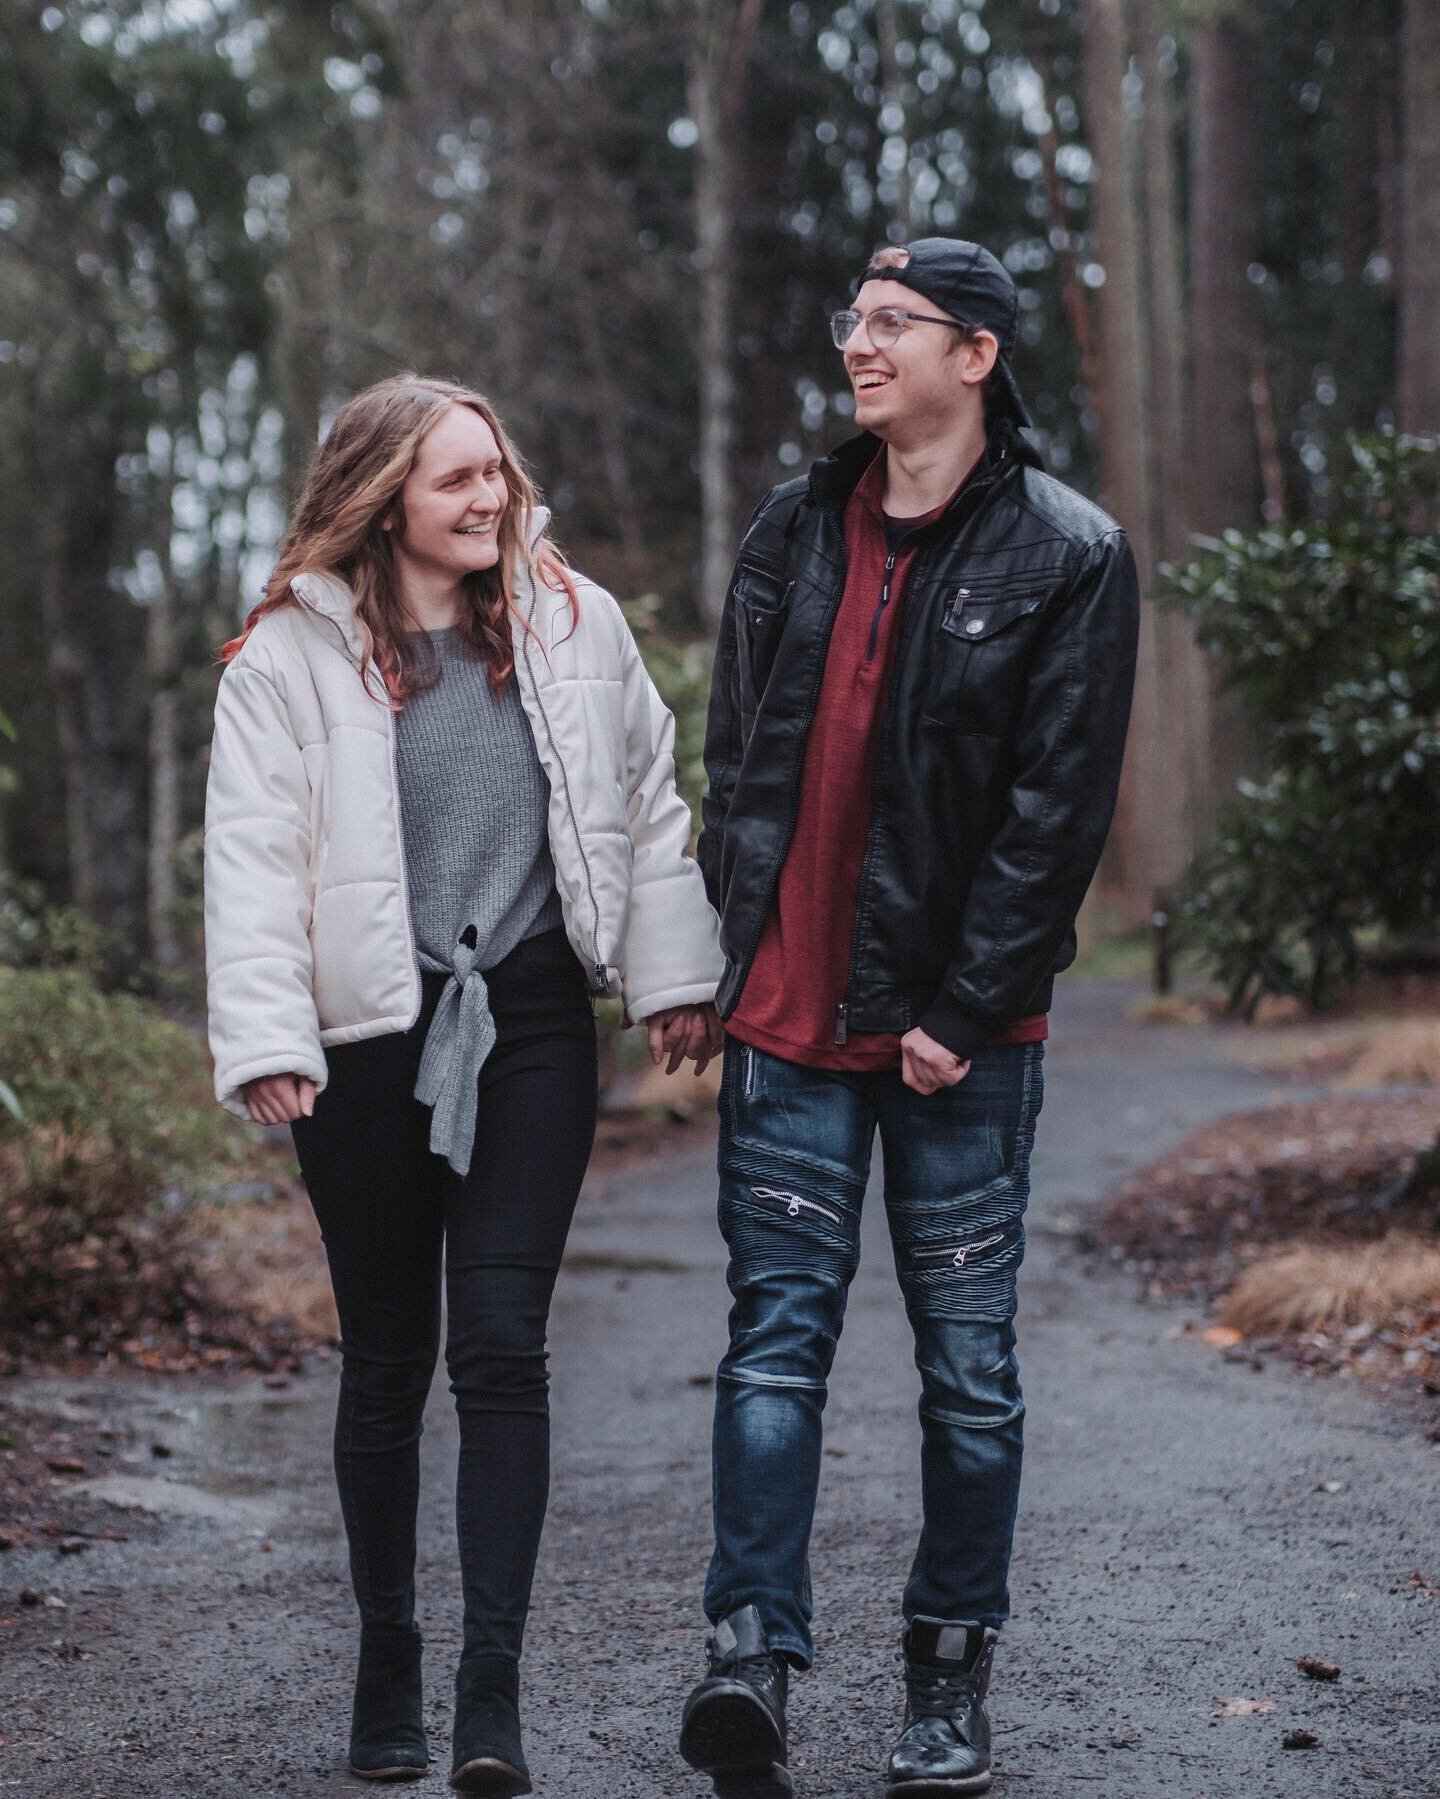 Oh would you look at that, more walking shots! I love doing photos with these 2 and I can&rsquo;t wait for our next photoshoot 😁

#photoshoot #photography #couplesphotos #couples #walkingshots #pnw #fujifilm #fujifilmxt4 #bestfriends #myfujifilmlega